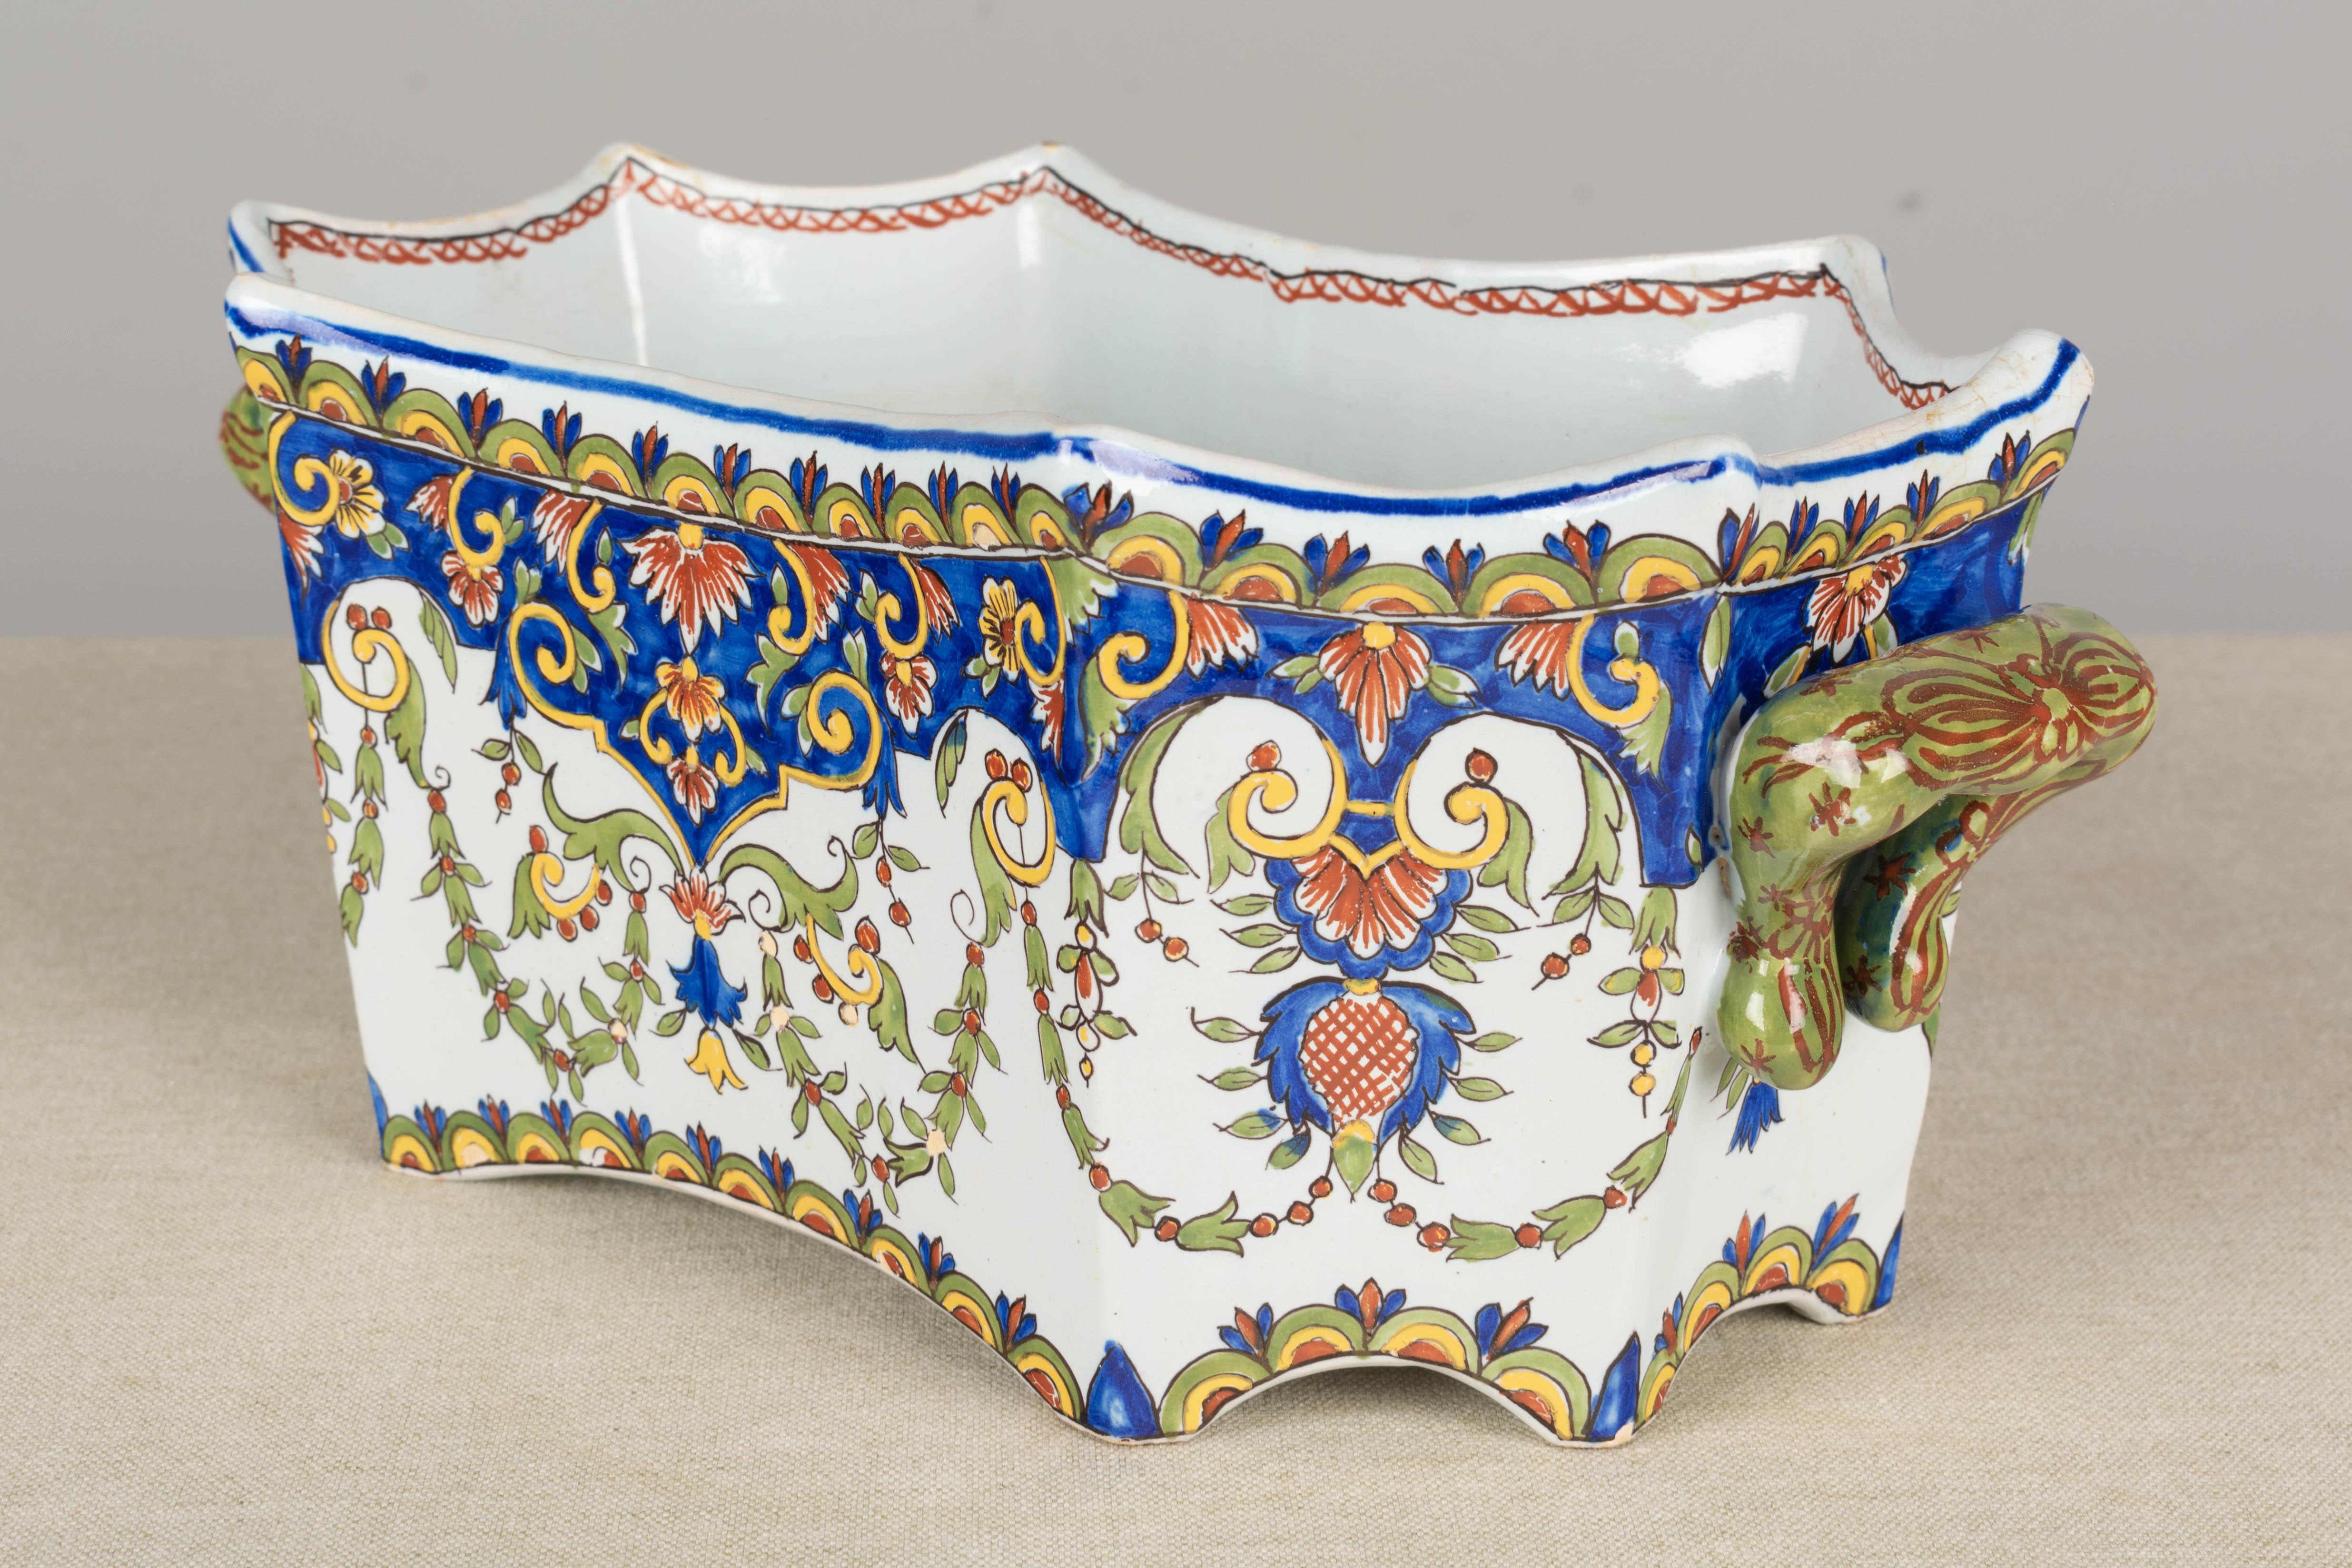 19th Century French Desvres Faience Jardinière For Sale 3